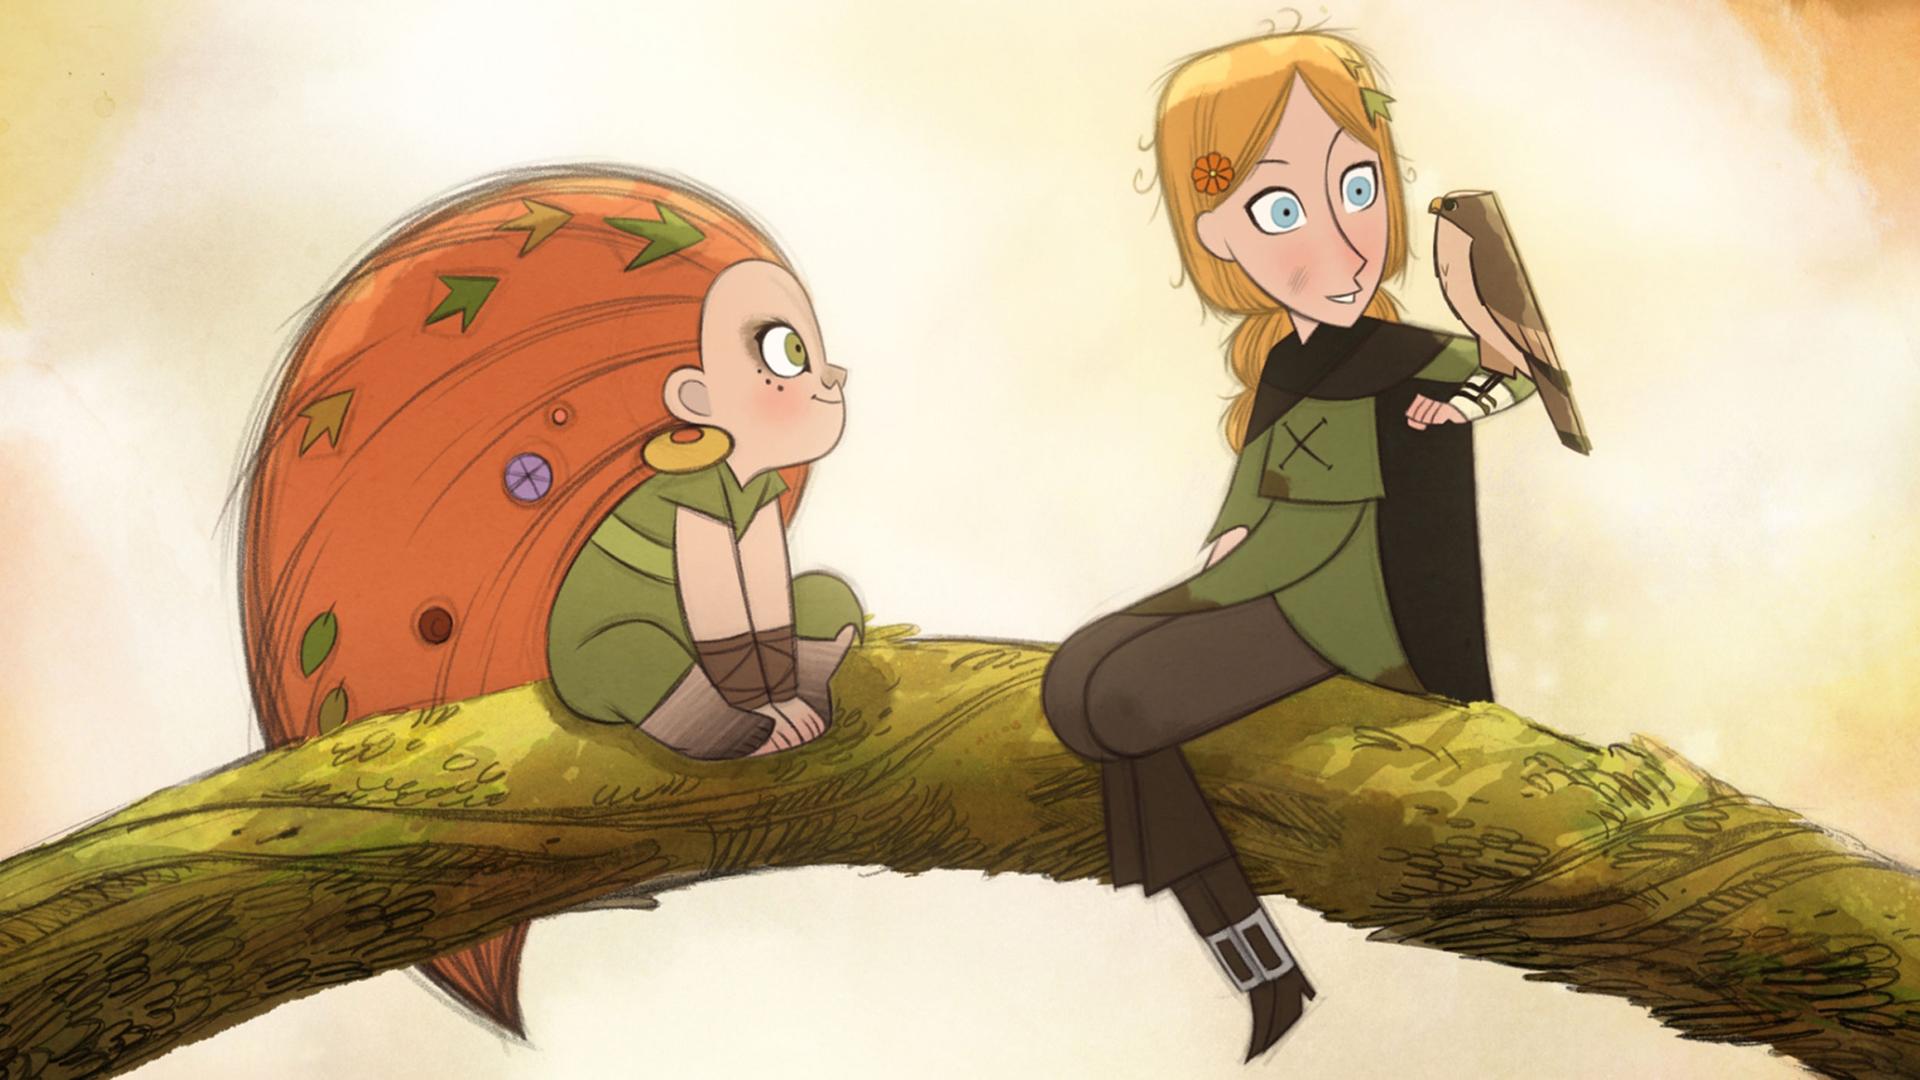 Animation of girl with blonde hair holding a bird and girl with orange hair watching, while sitting on a tree branch